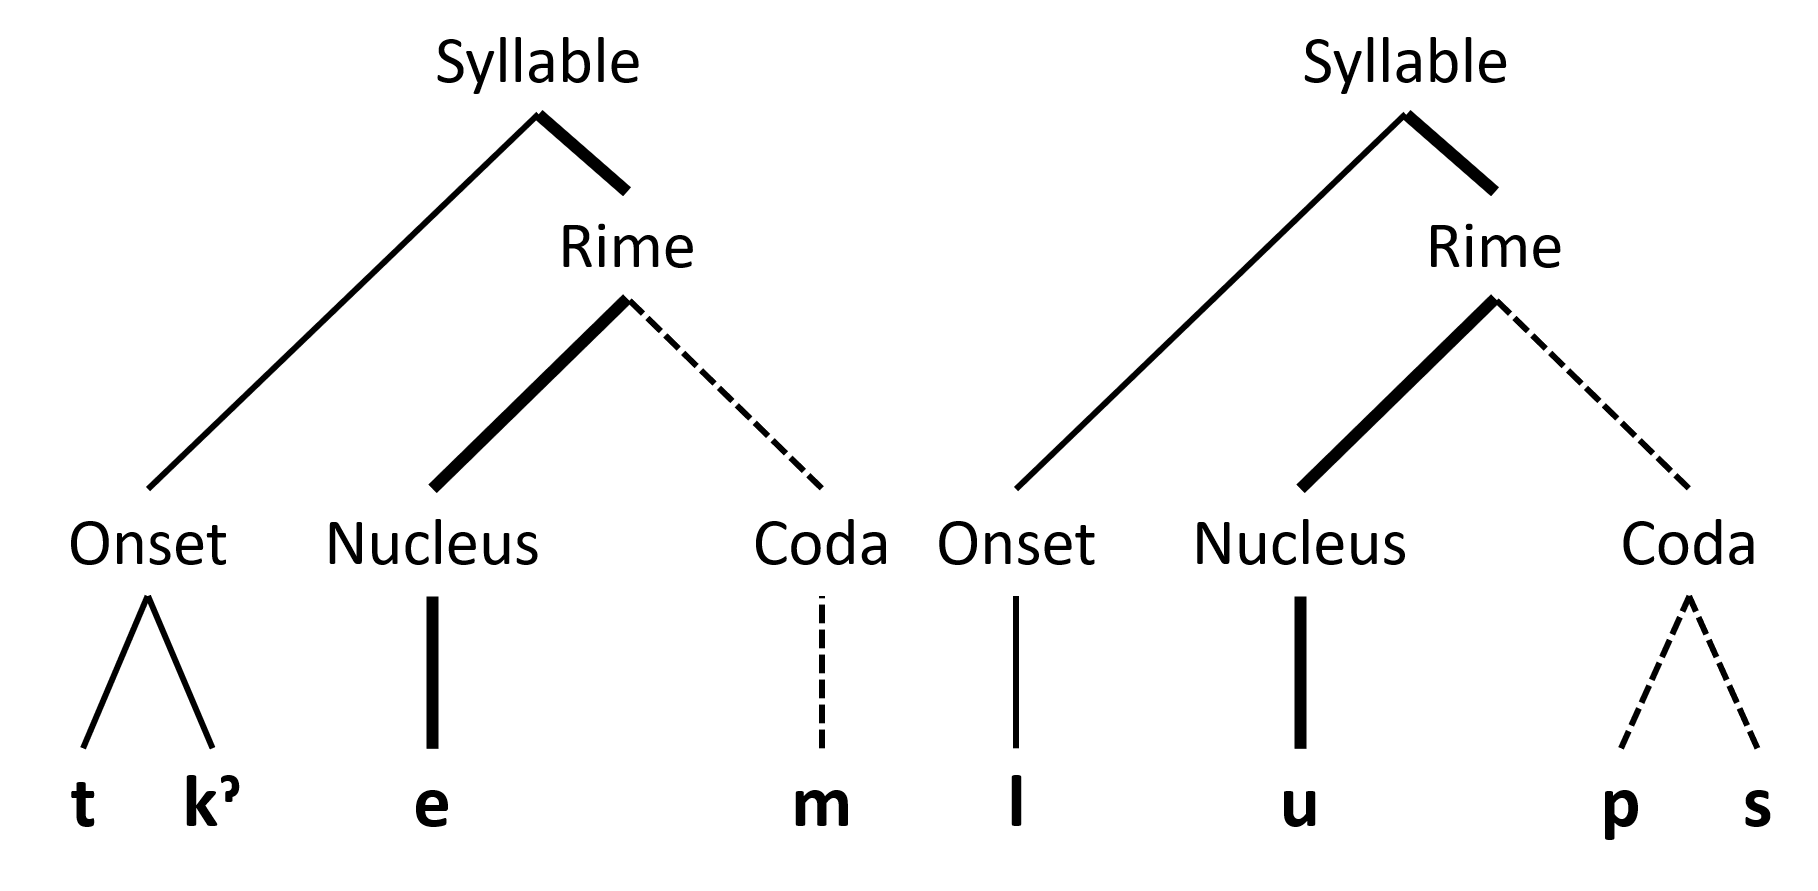 A similar branching diagram as portrayed in figure 2.10, displaying the syllabic components of the word Tk’emlups and dividing them into onset, nucleus, and coda components.